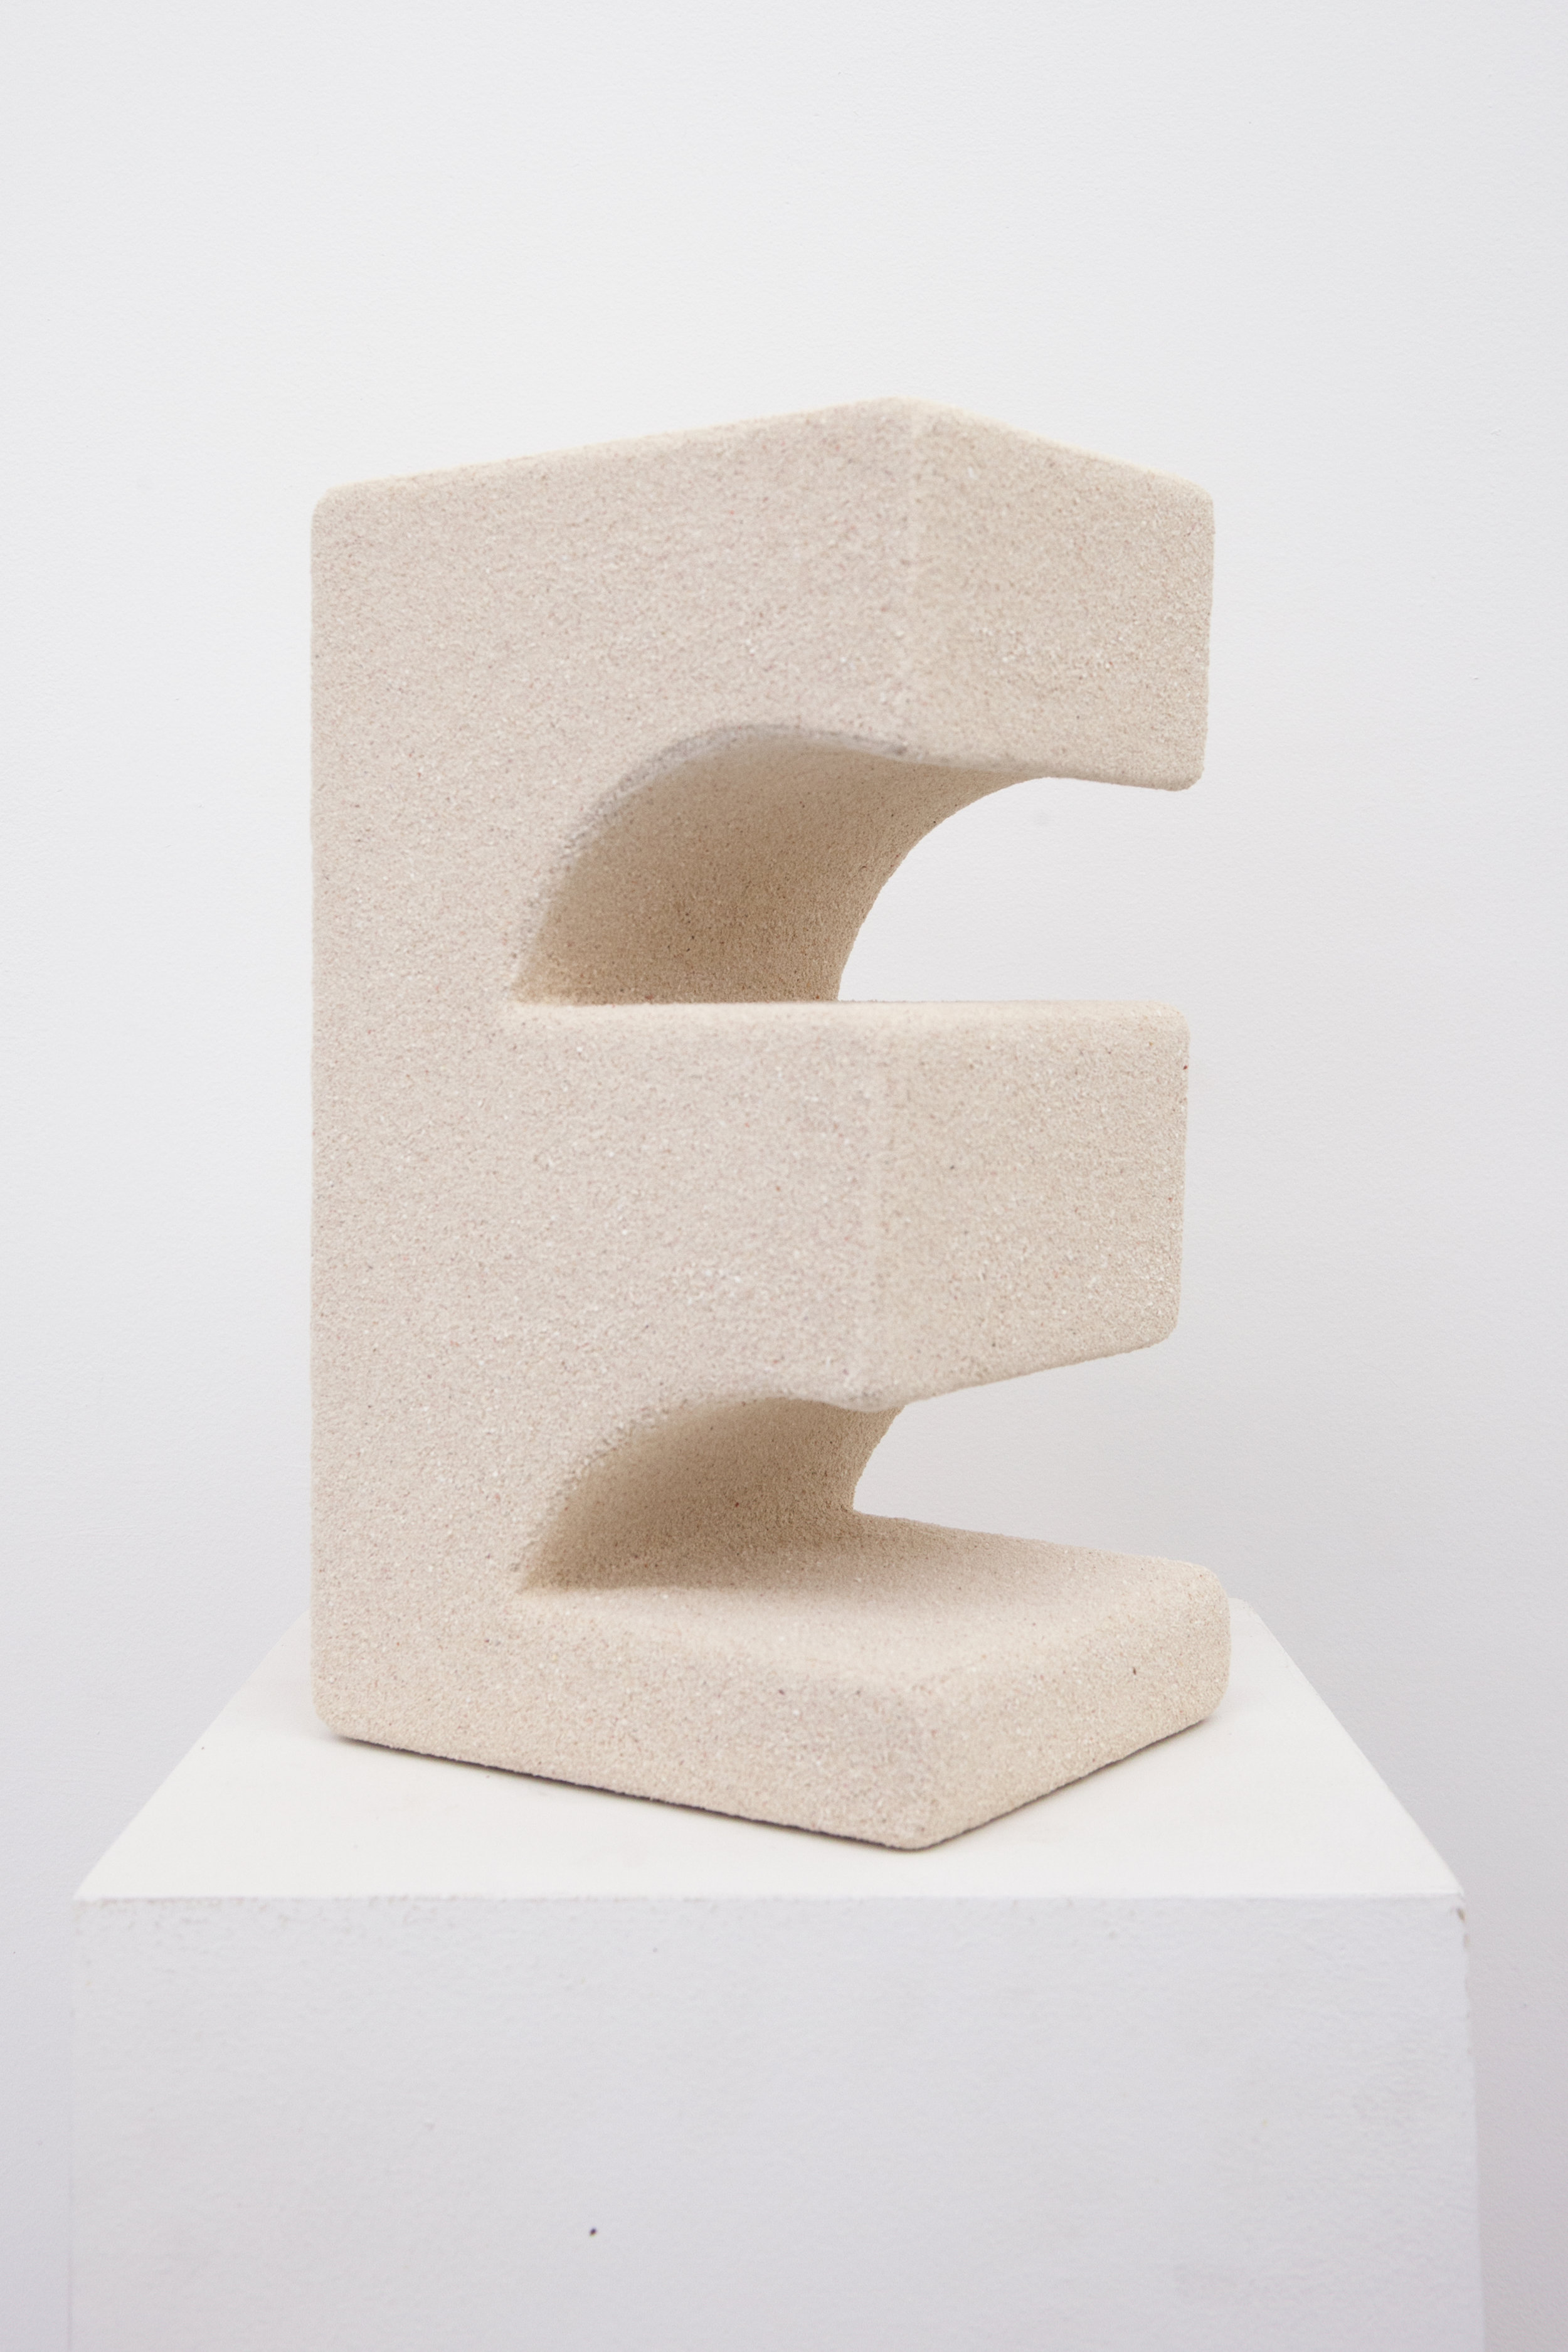  Elizabeth Atterbury.  The Well (Piece from the first) , 2018, Beach sand, MDF and glue. 11 x 6.50 x 5.12 in  